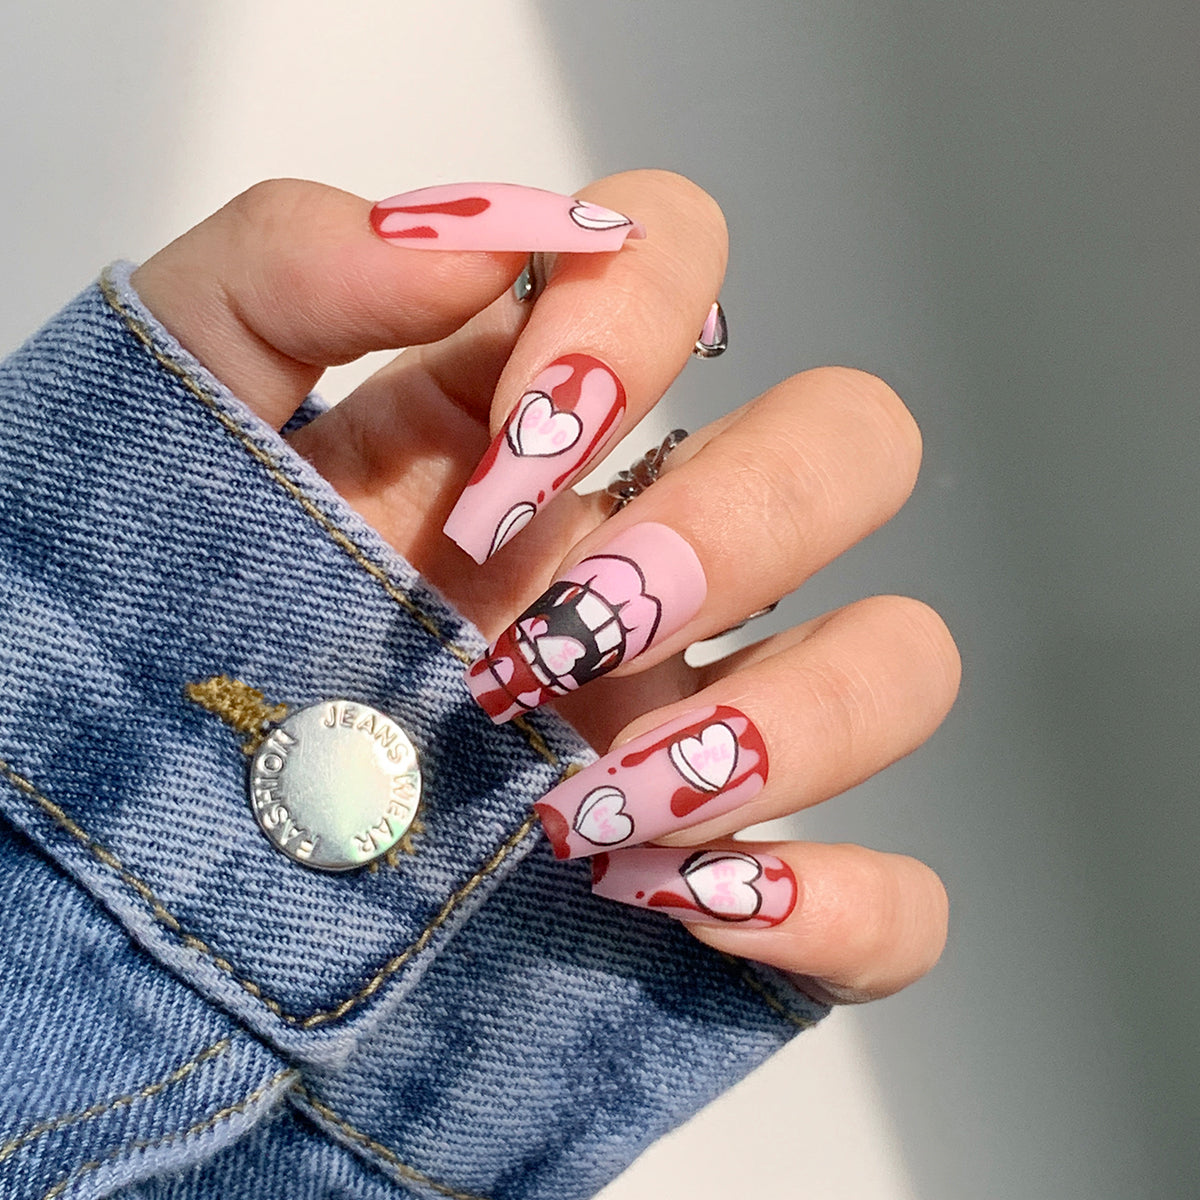 Who Are You Long Coffin Pink Halloween Press On Nails – RainyRoses